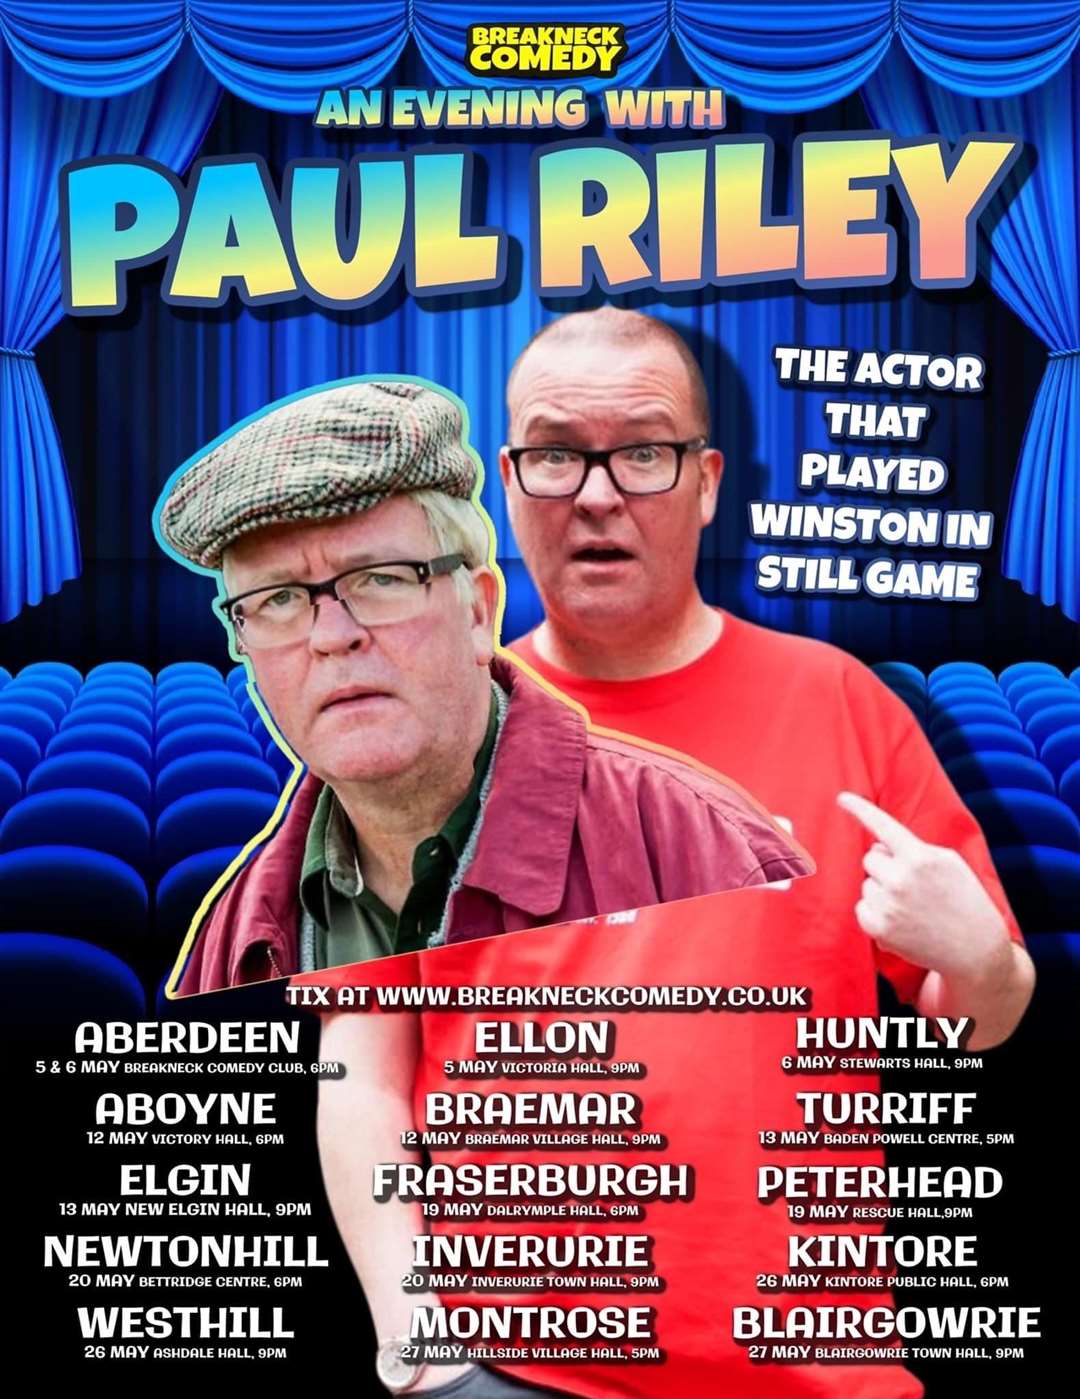 Paul Riley, who plays Winston in Still Game, is set to visit several places across the north-east.